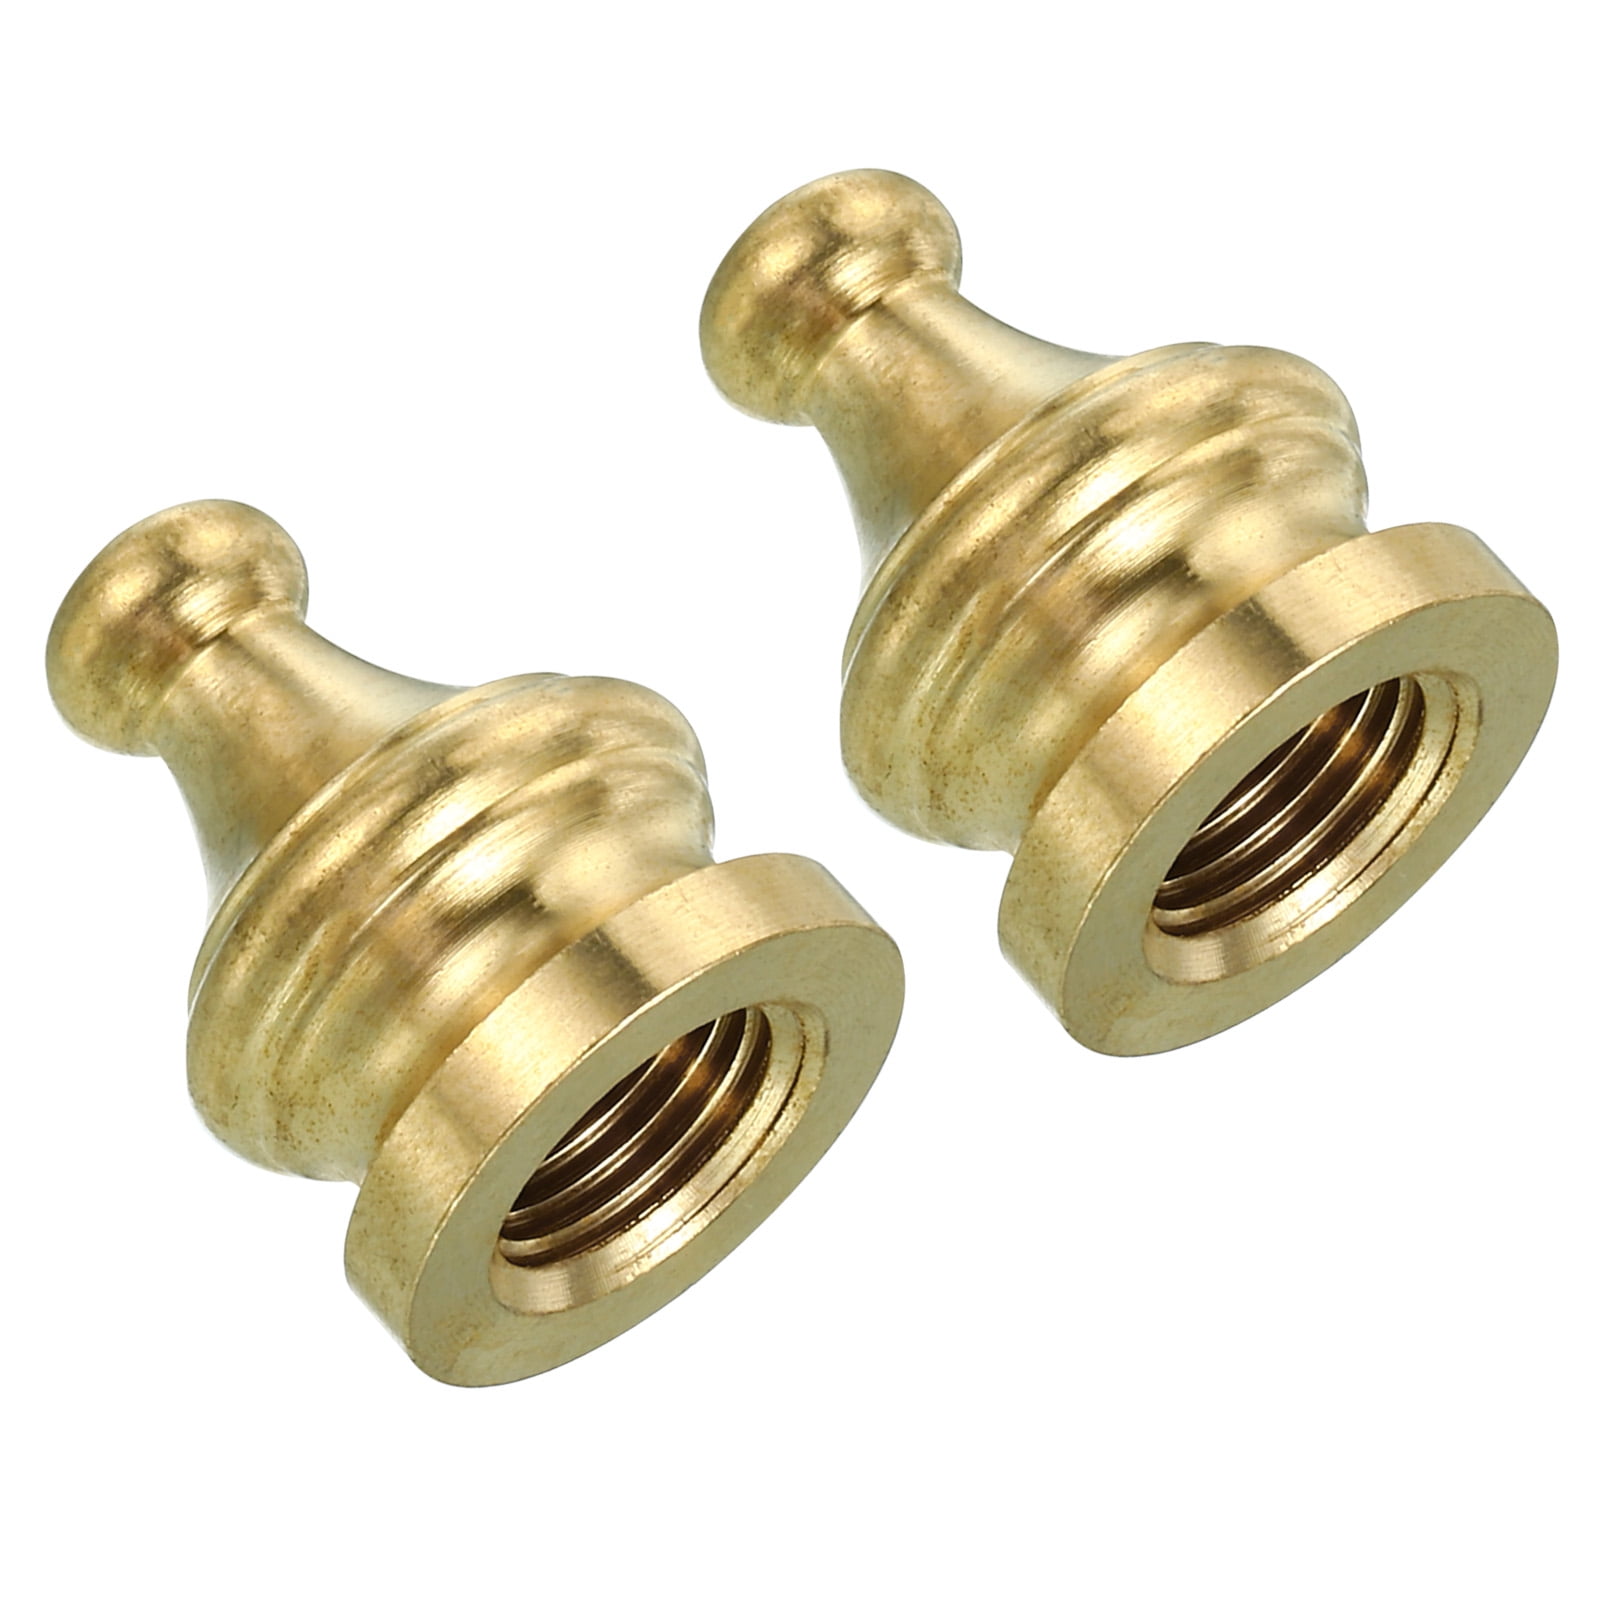 Coupling - Decorative - Solid Brass